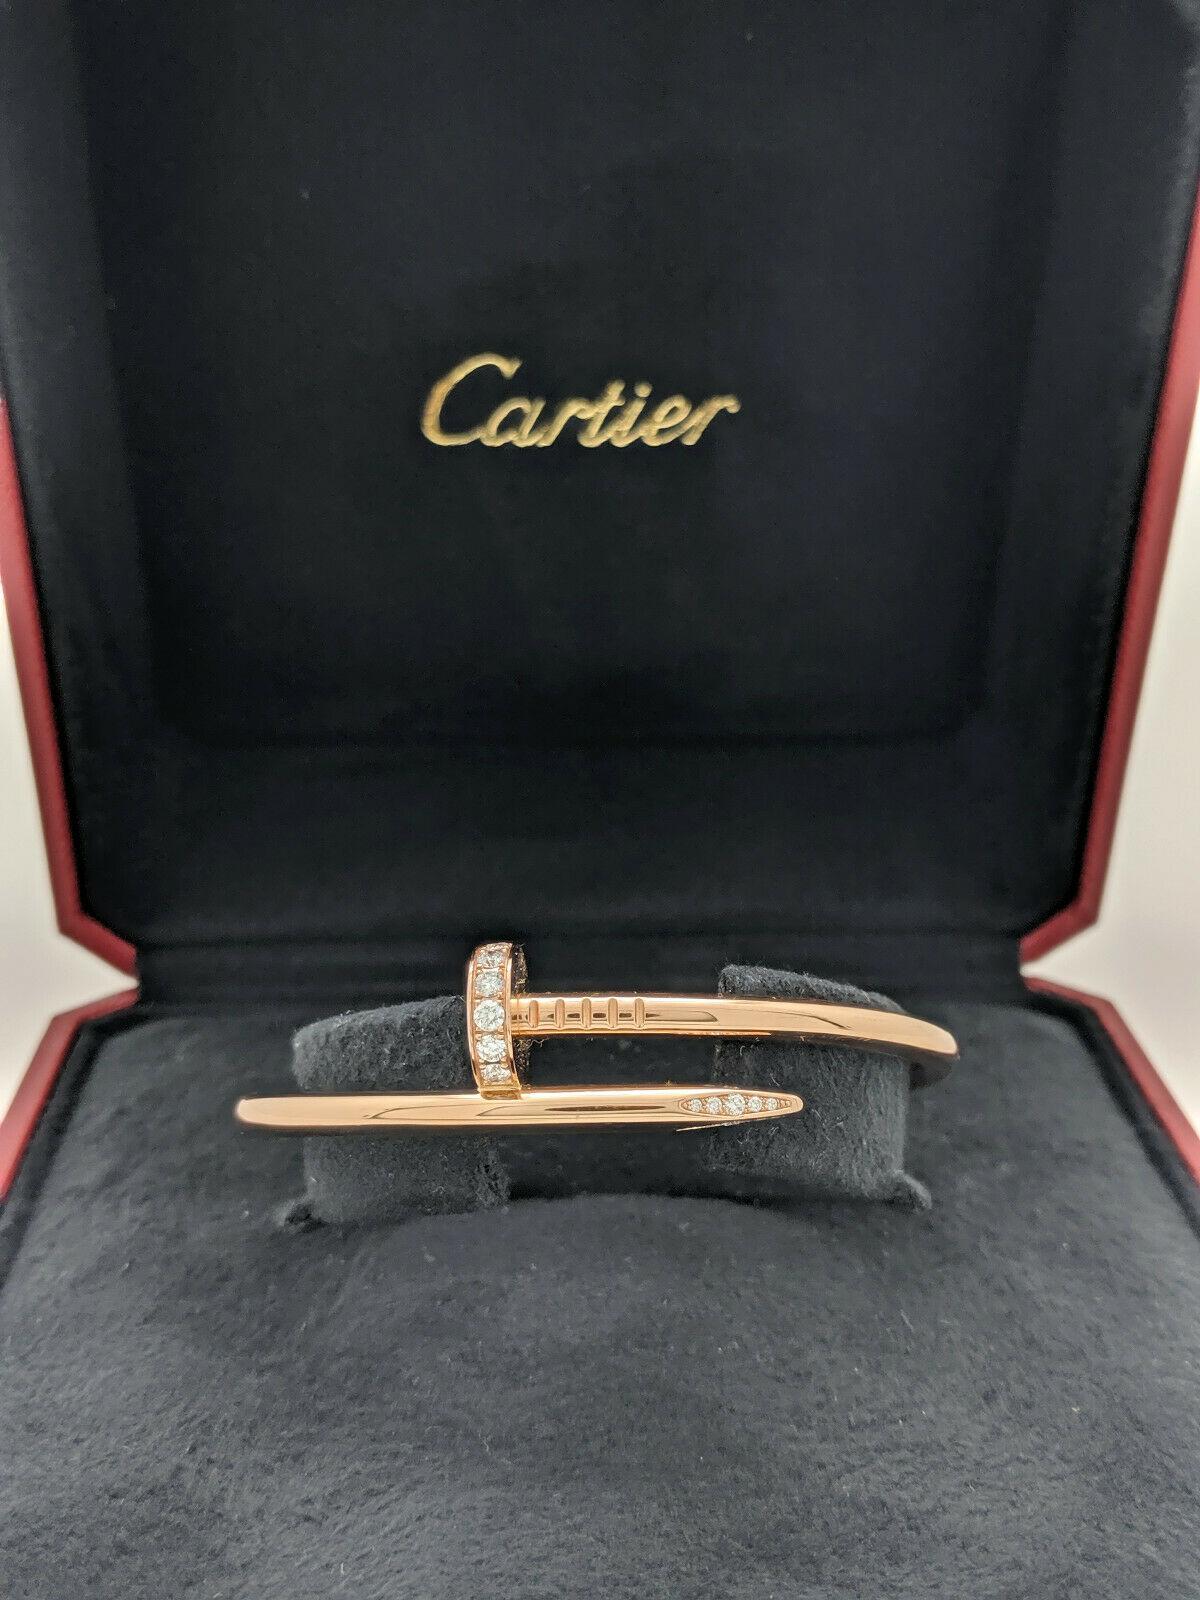 You are viewing an Authentic Juste un Clou Bracelet in 18K Rose Gold size 16 that was just purchased in March 2019 and never worn!!
Designer:  Cartier
Collection: Juste un Clou
Material: Rose Gold
Metal Purity: 18k
Diamonds: 32 Round Brilliant Cut